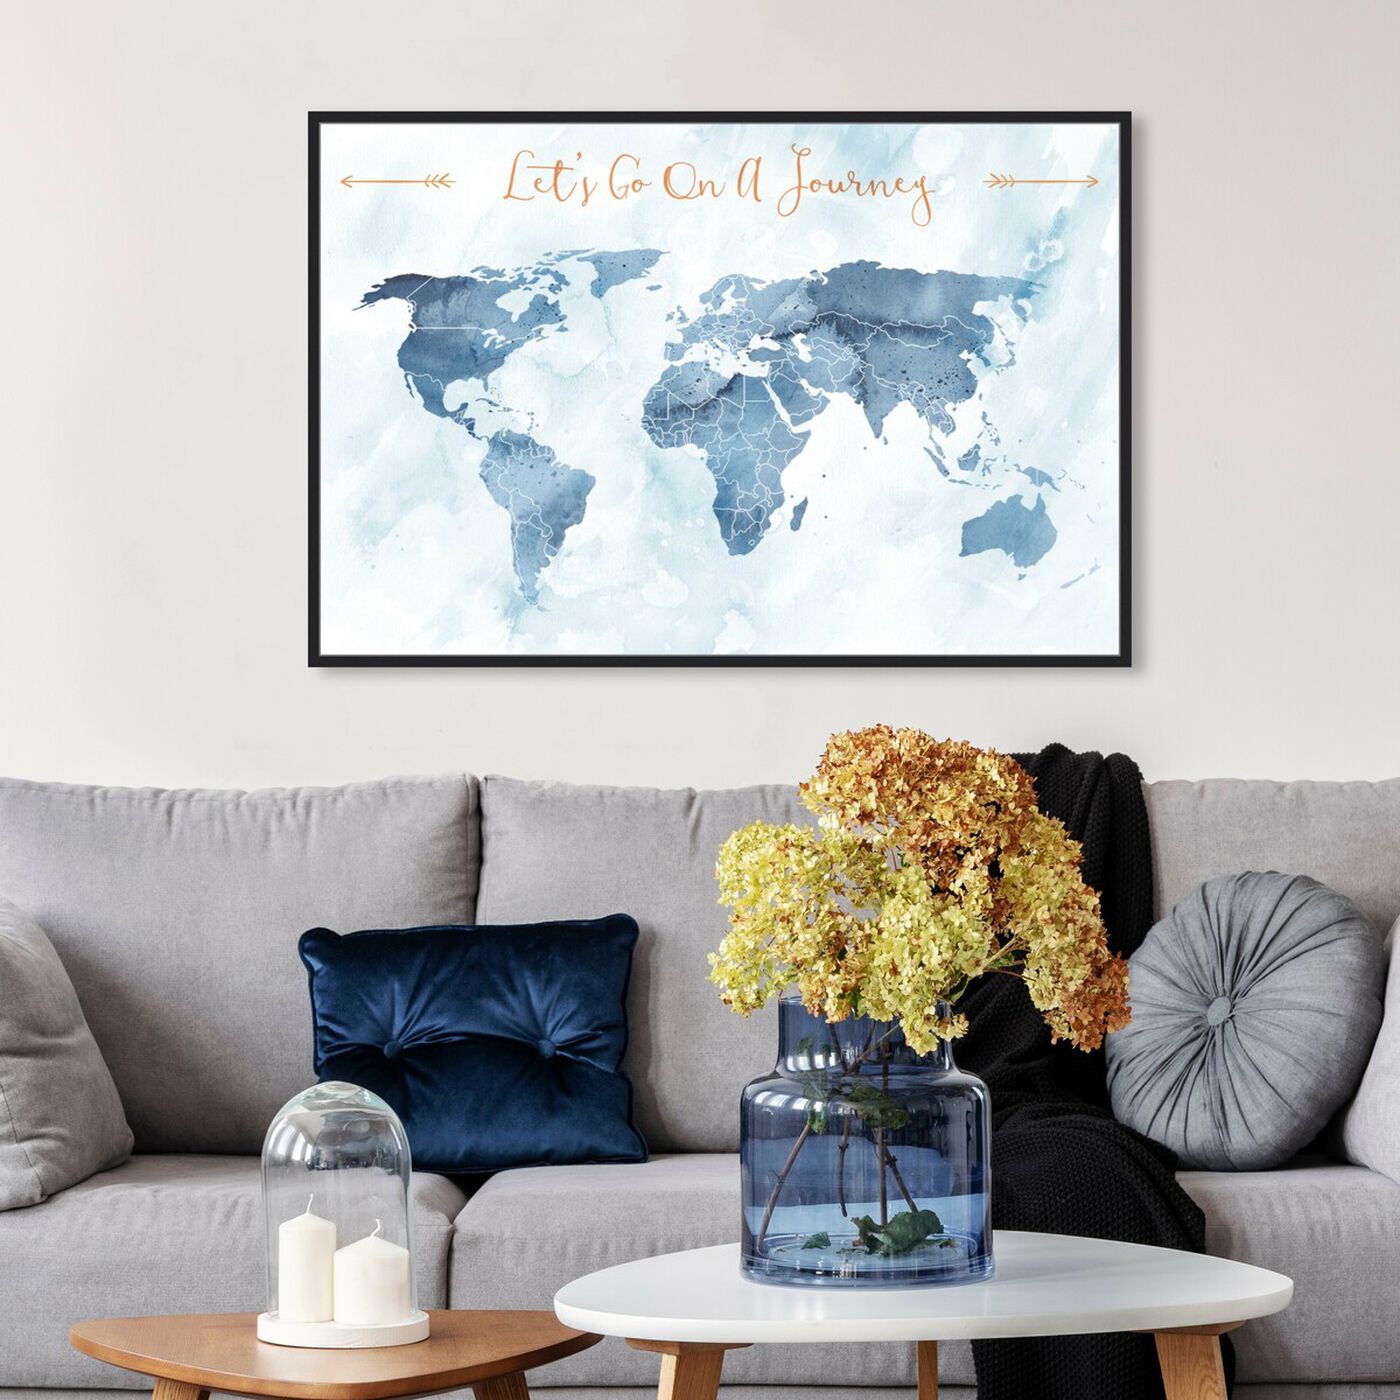 Hanging view of Lets Go On A Journey featuring maps and flags and world maps art.